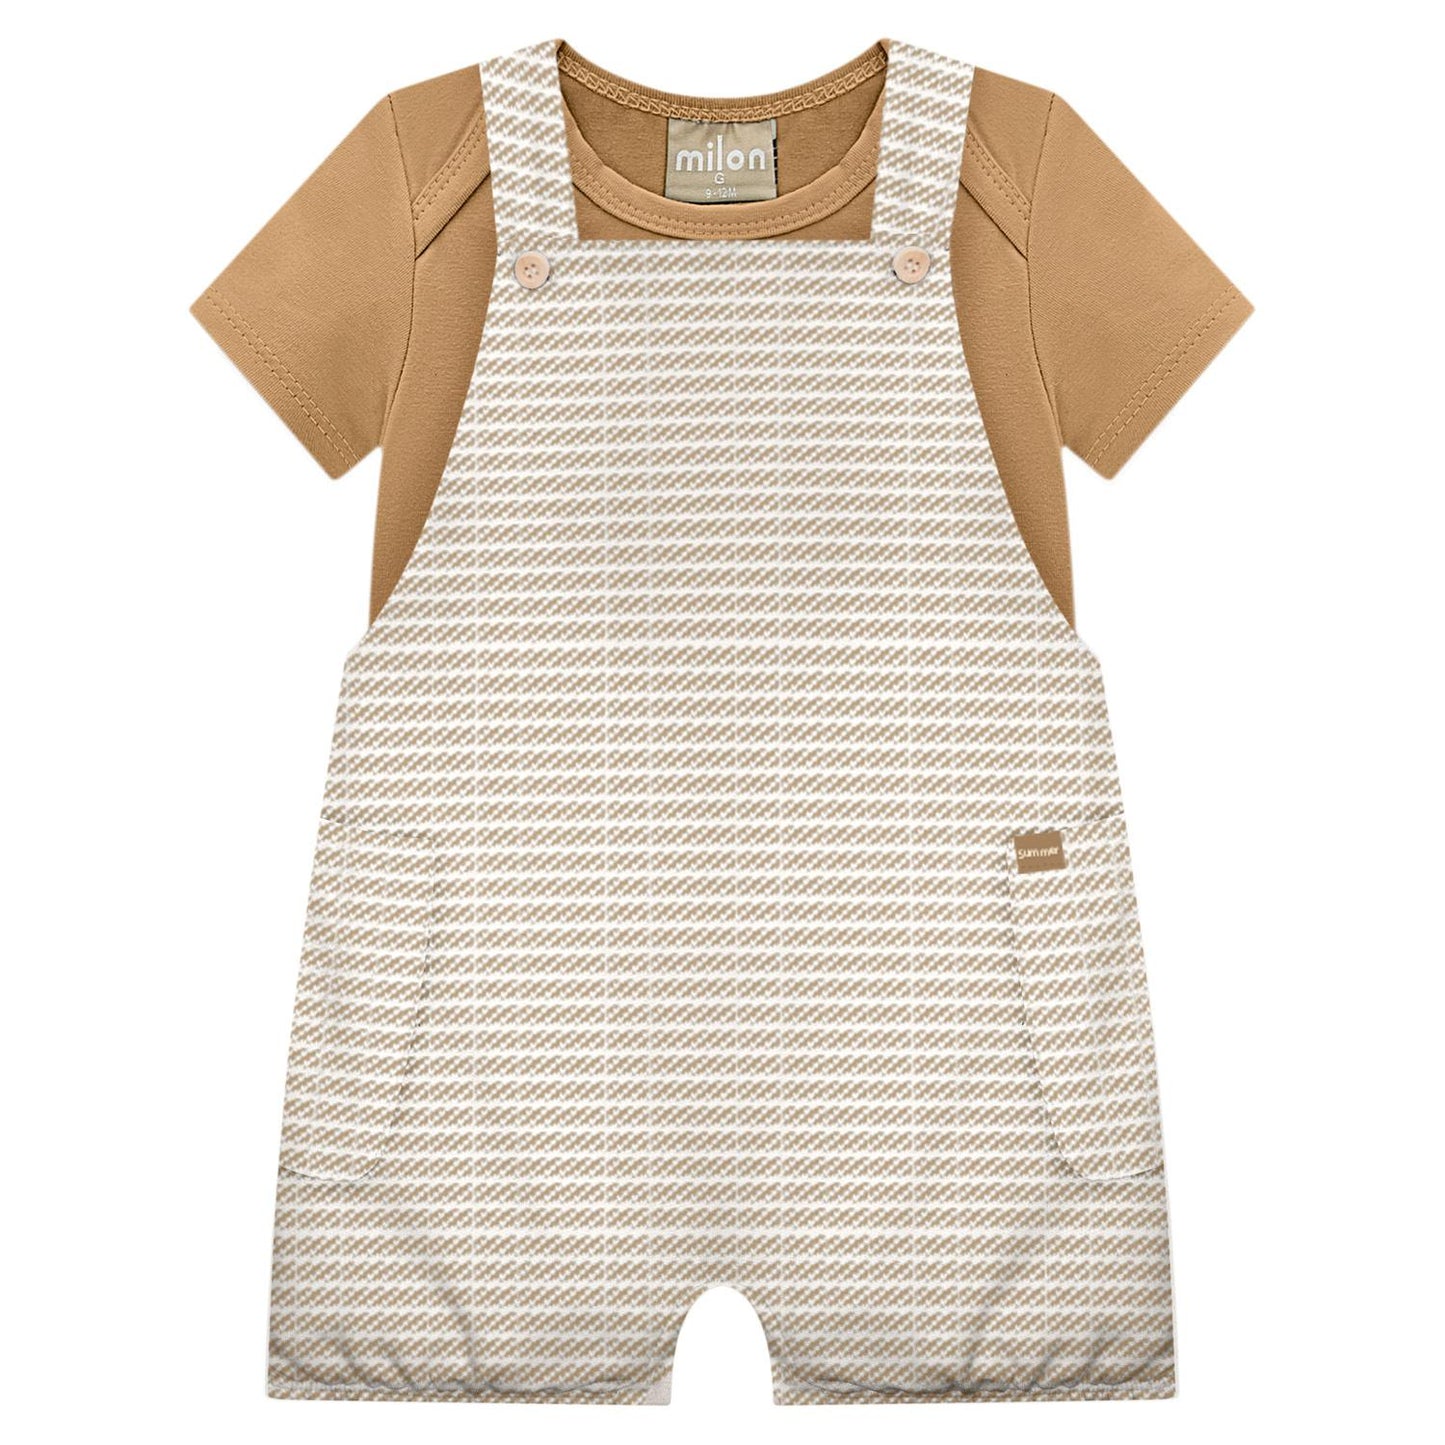 Striped Knit Overall/Onesie Set